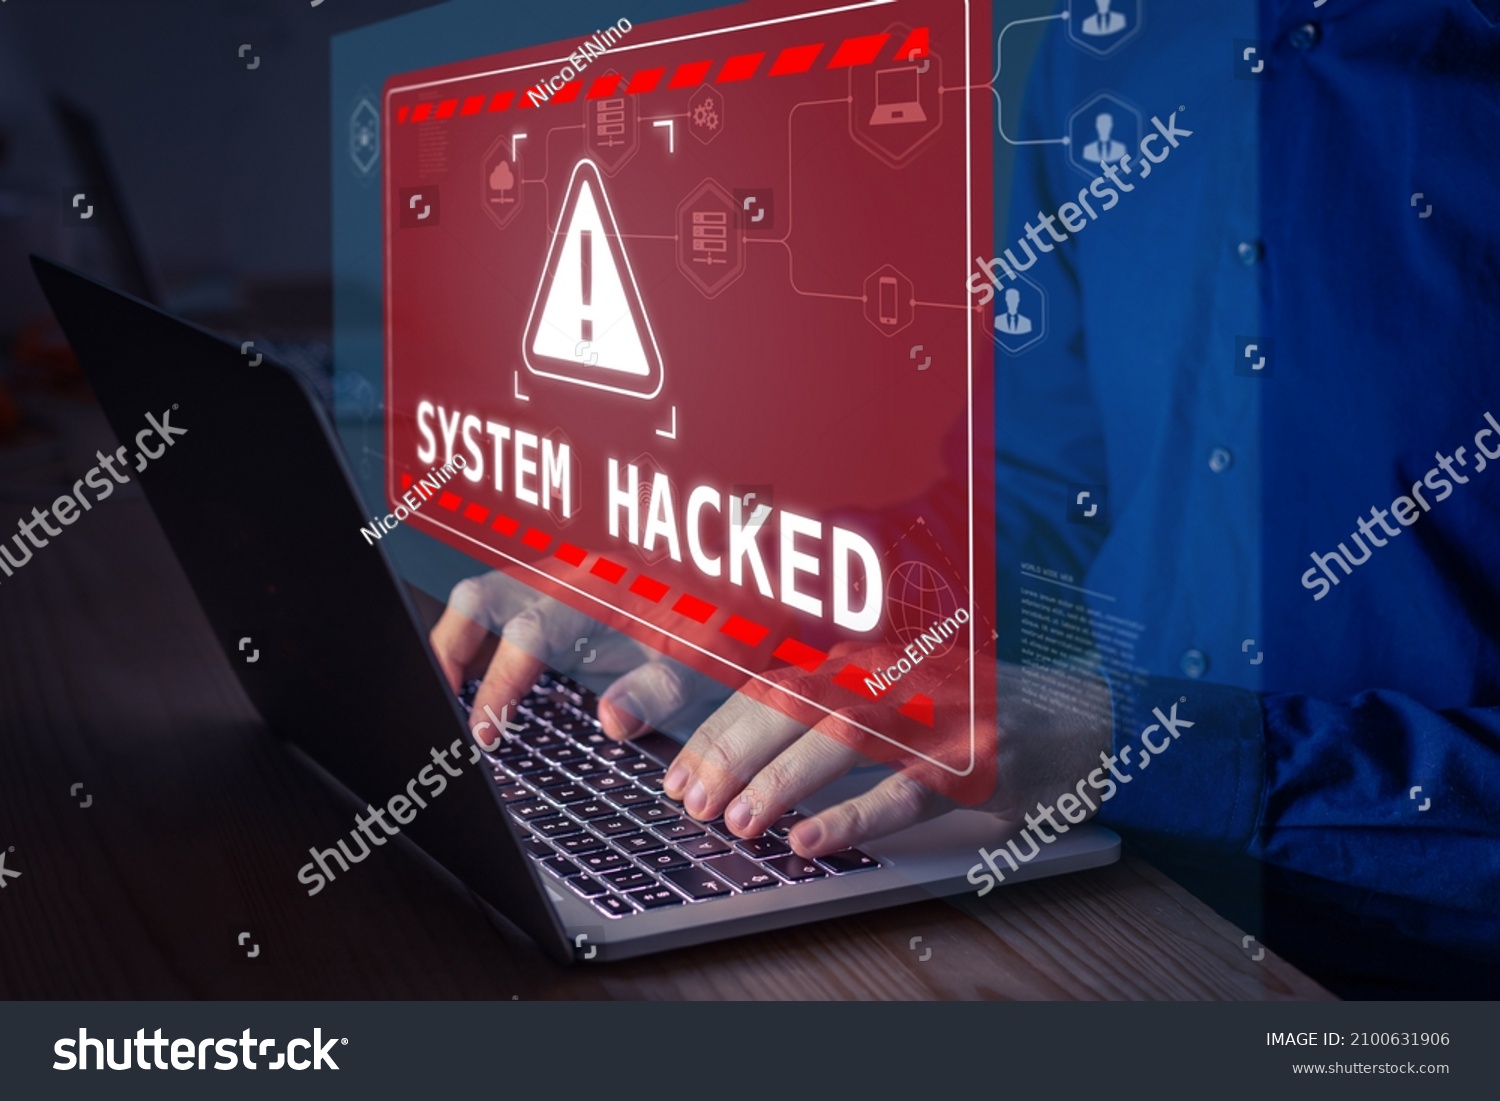 System hacked alert after cyber attack on computer network. Cybersecurity vulnerability, data breach, illegal connection, compromised information concept. Malicious software, virus and cybercrime. #2100631906